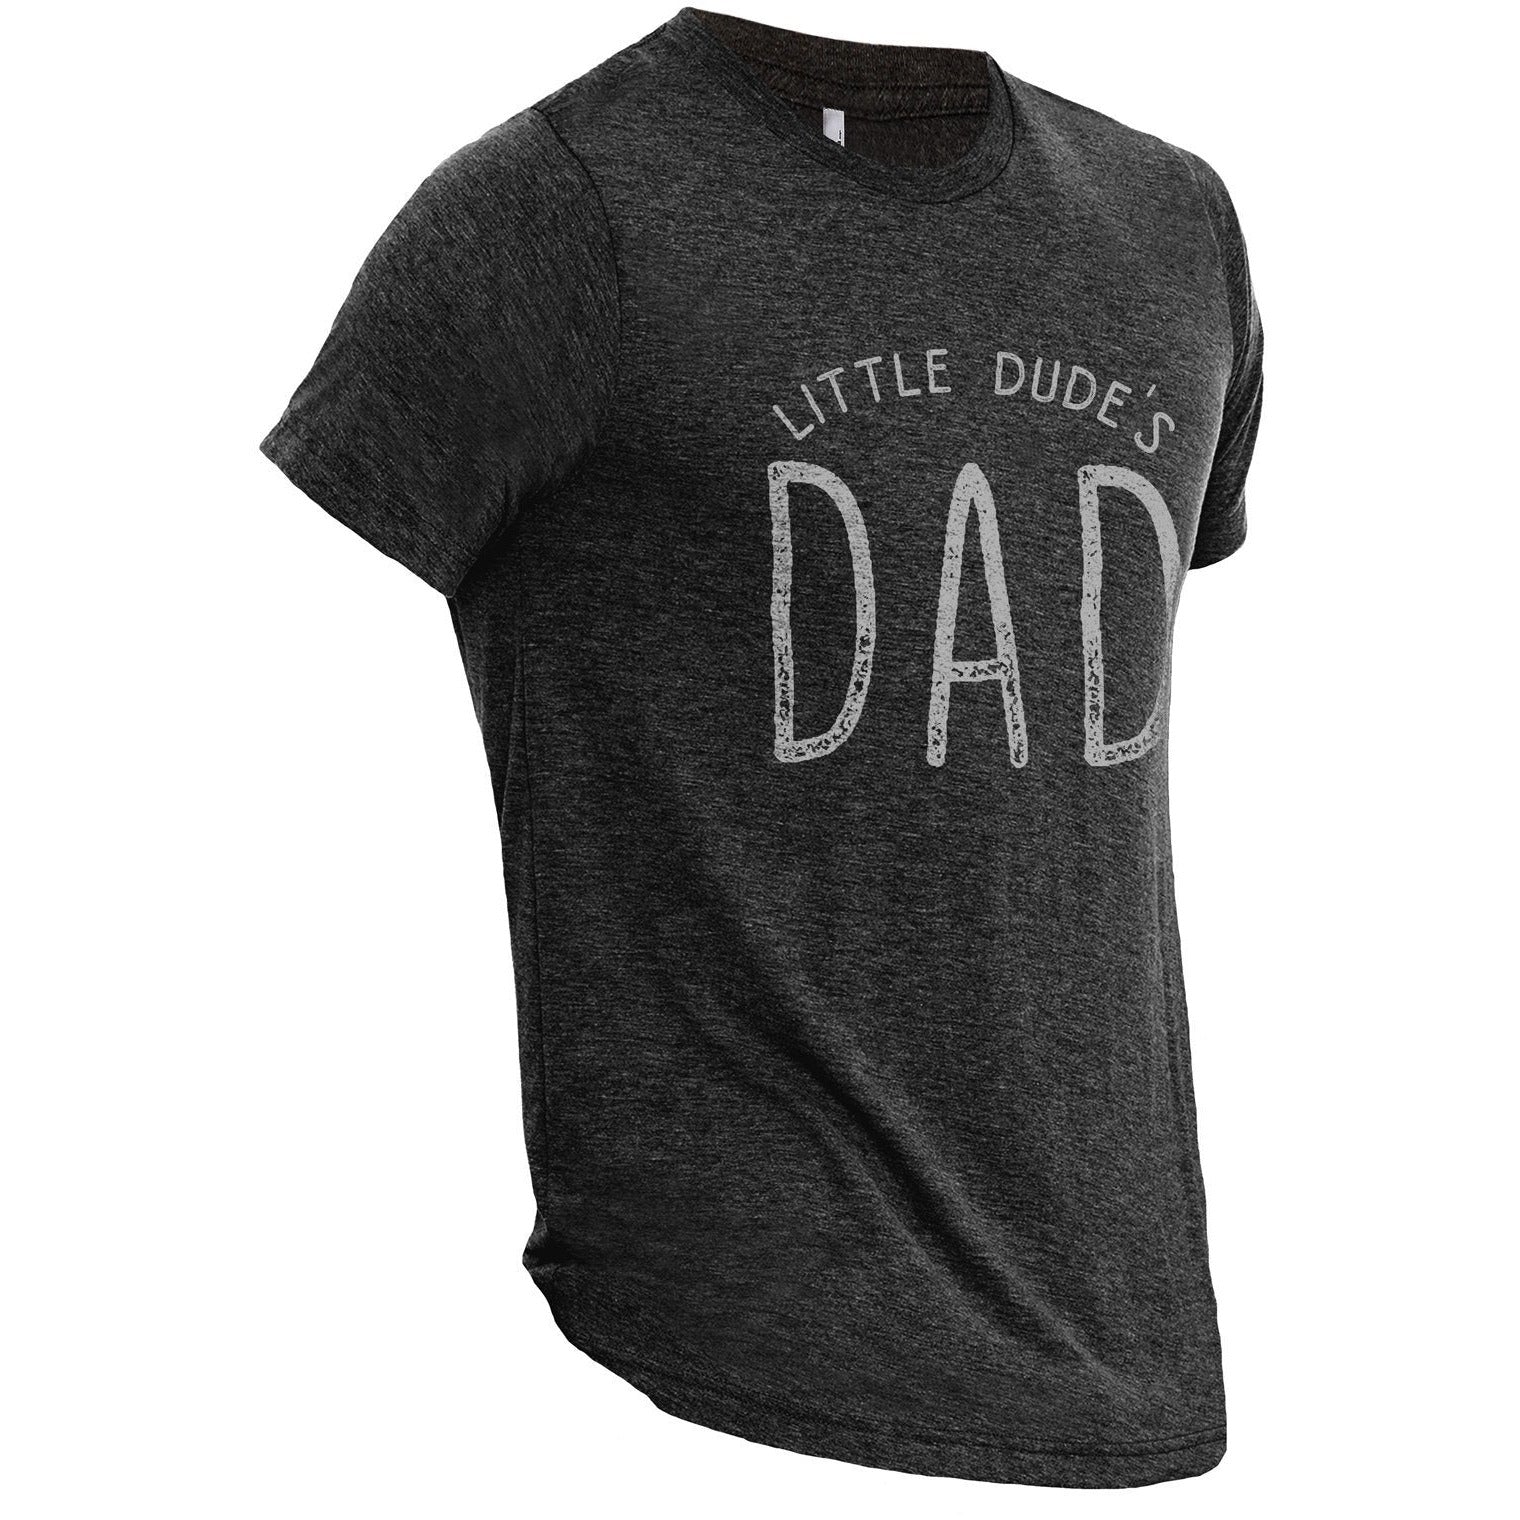 Lil Dude's Dad Charcoal Printed Graphic Men's Crew T-Shirt Tee Side View